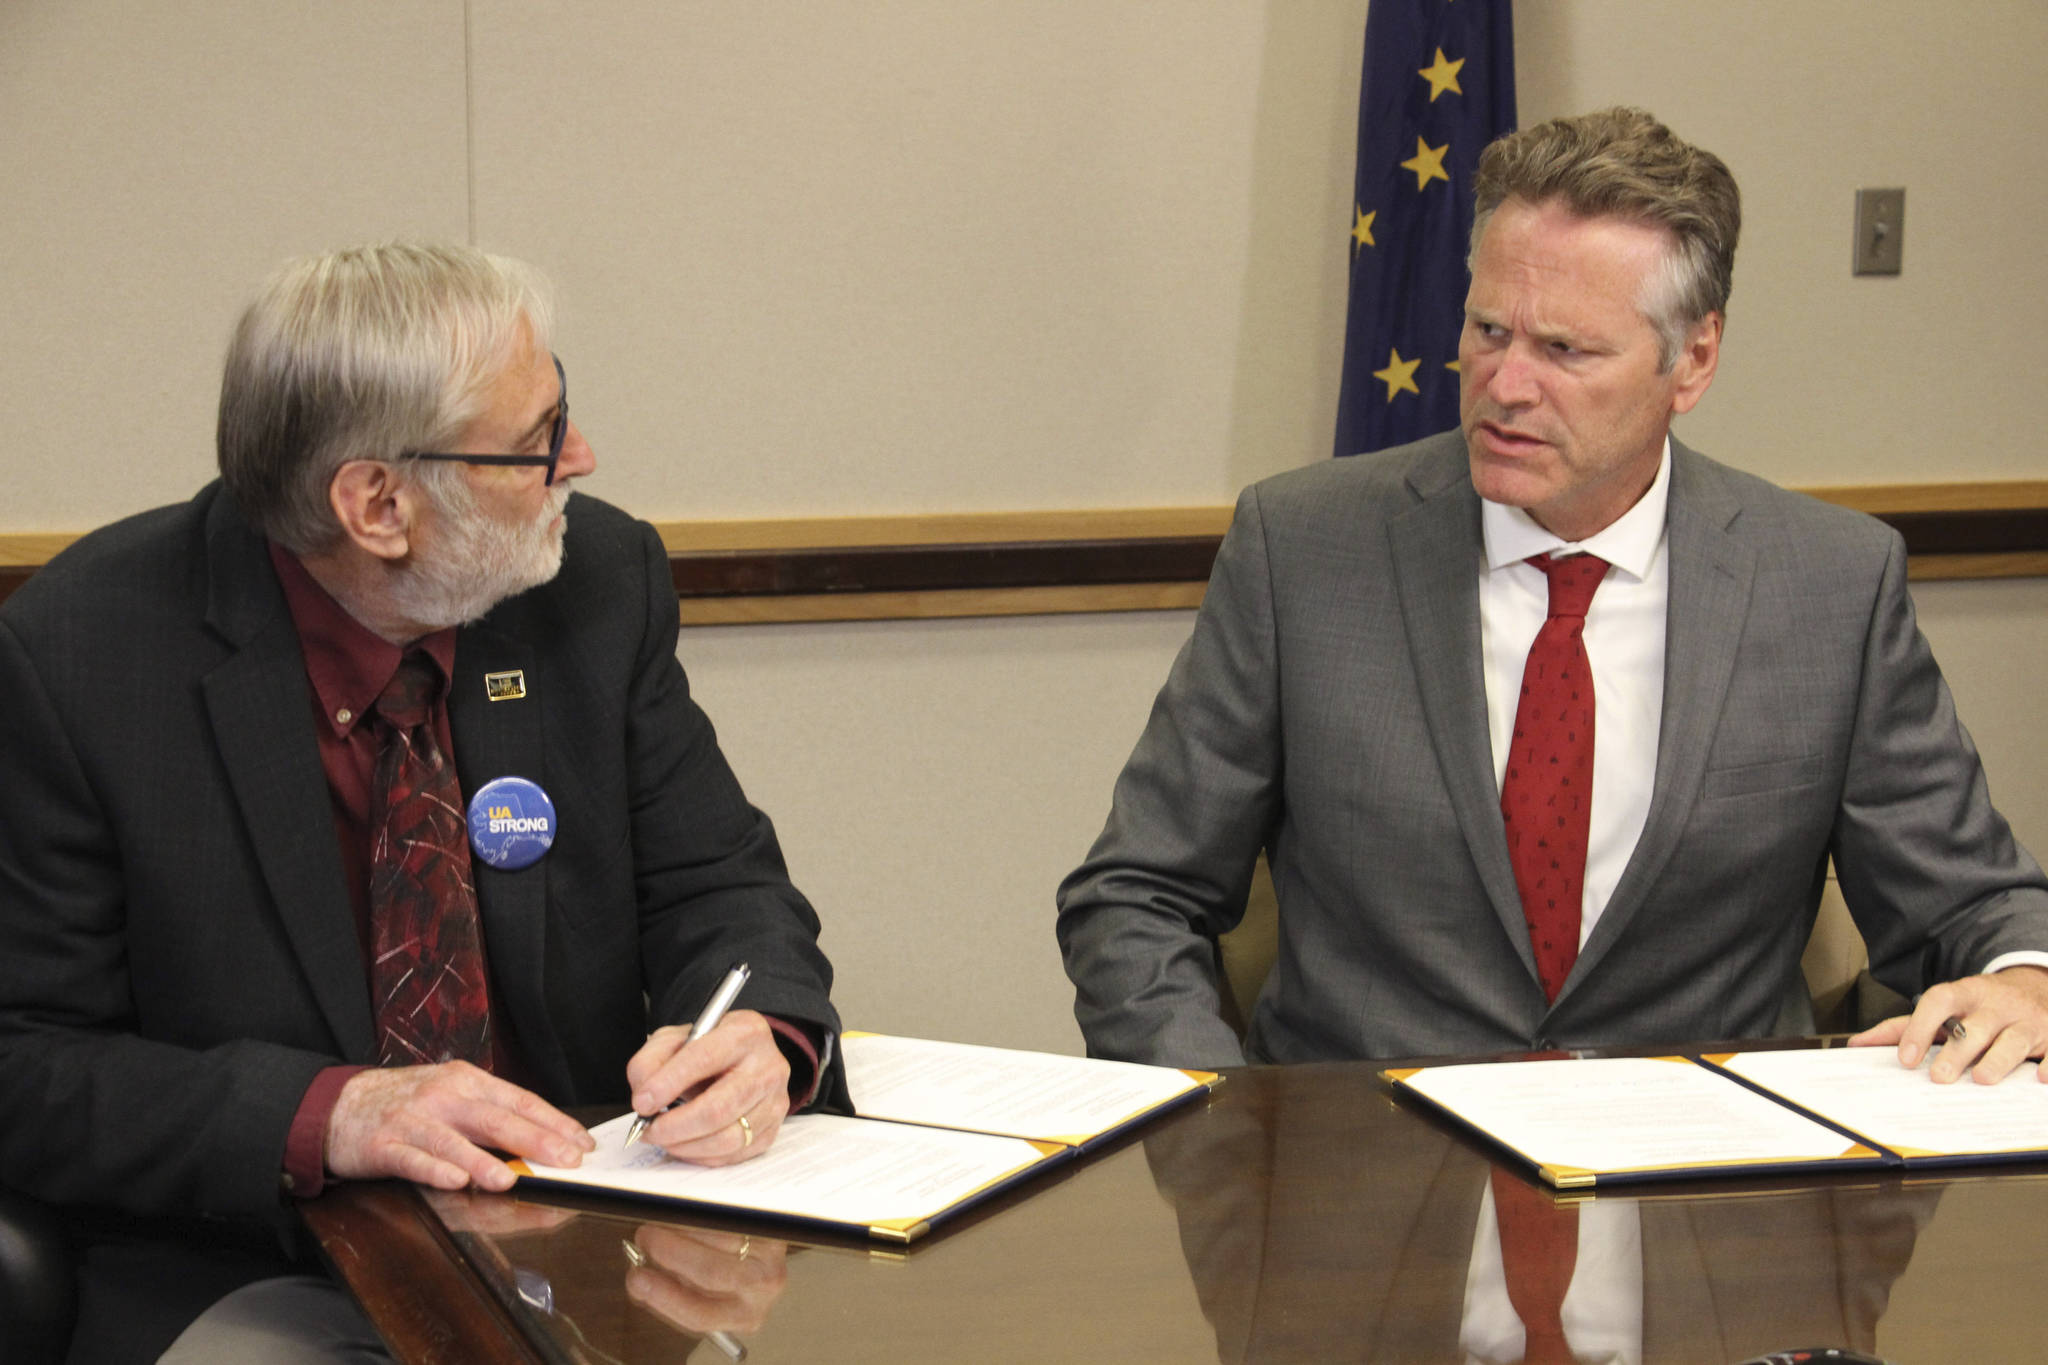 University of Alaska Board of Regents chairman John Davies, left, and Gov. Mike Dunleavy sign an agreement, Tuesday, Aug. 13, 2019, in Anchorage, Alaska, that will spread $70 million in cuts to the university system over three years. That is a sharp reversal from the $135 million cut Dunleavy earlier proposed for this year. (AP Photo/Mark Thiessen)